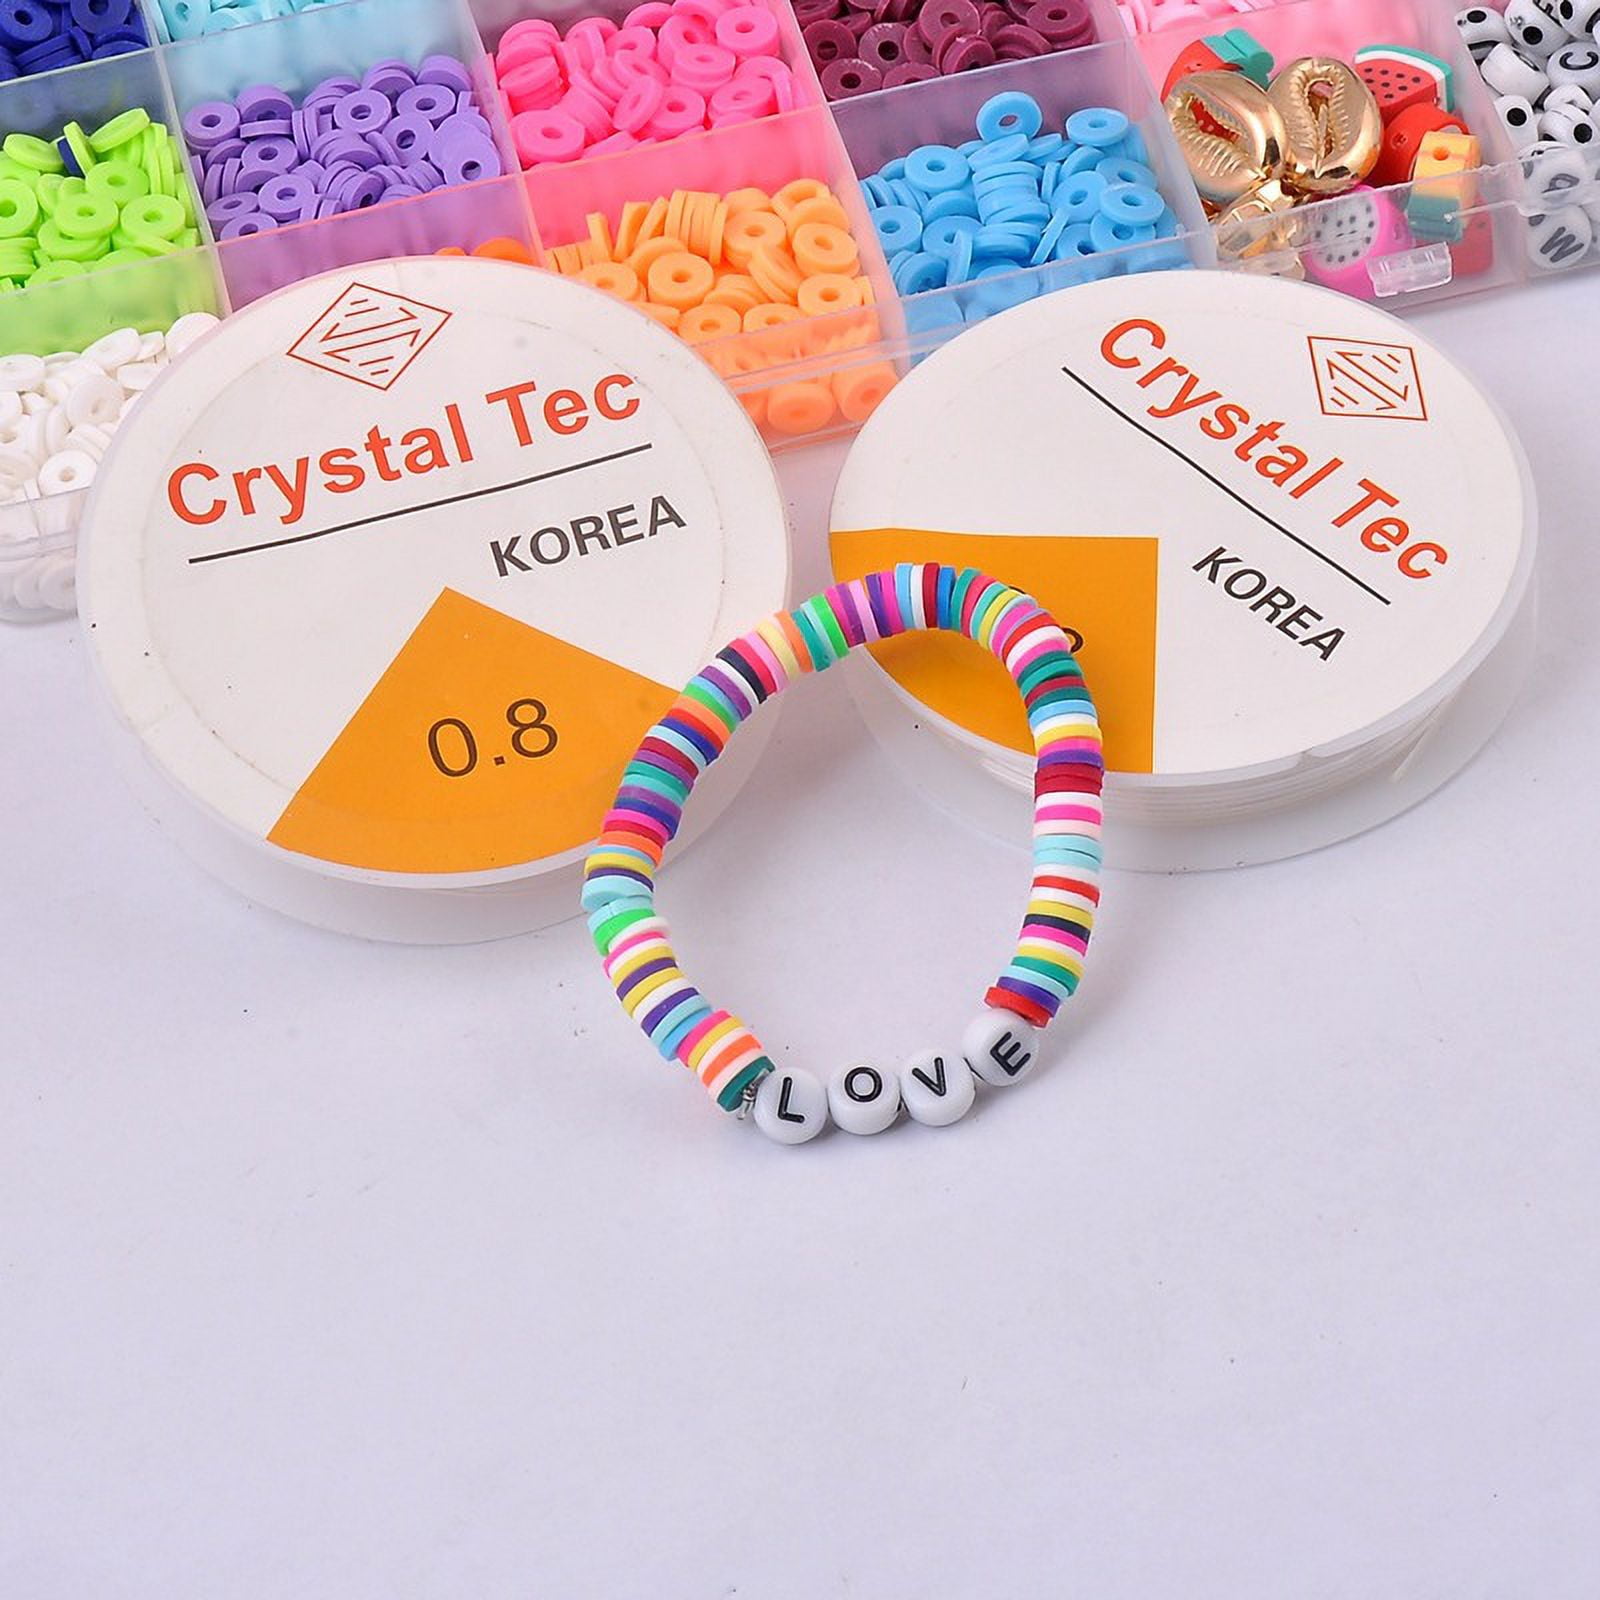 Aaomassr Clay Flat Beads for Jewelry Bracelet Making, 6mm 20 Colors Bracelet Making Kit, Polymer Heishi Flat Beads, Smiley Face Letter Bead Arts and Crafts Kit